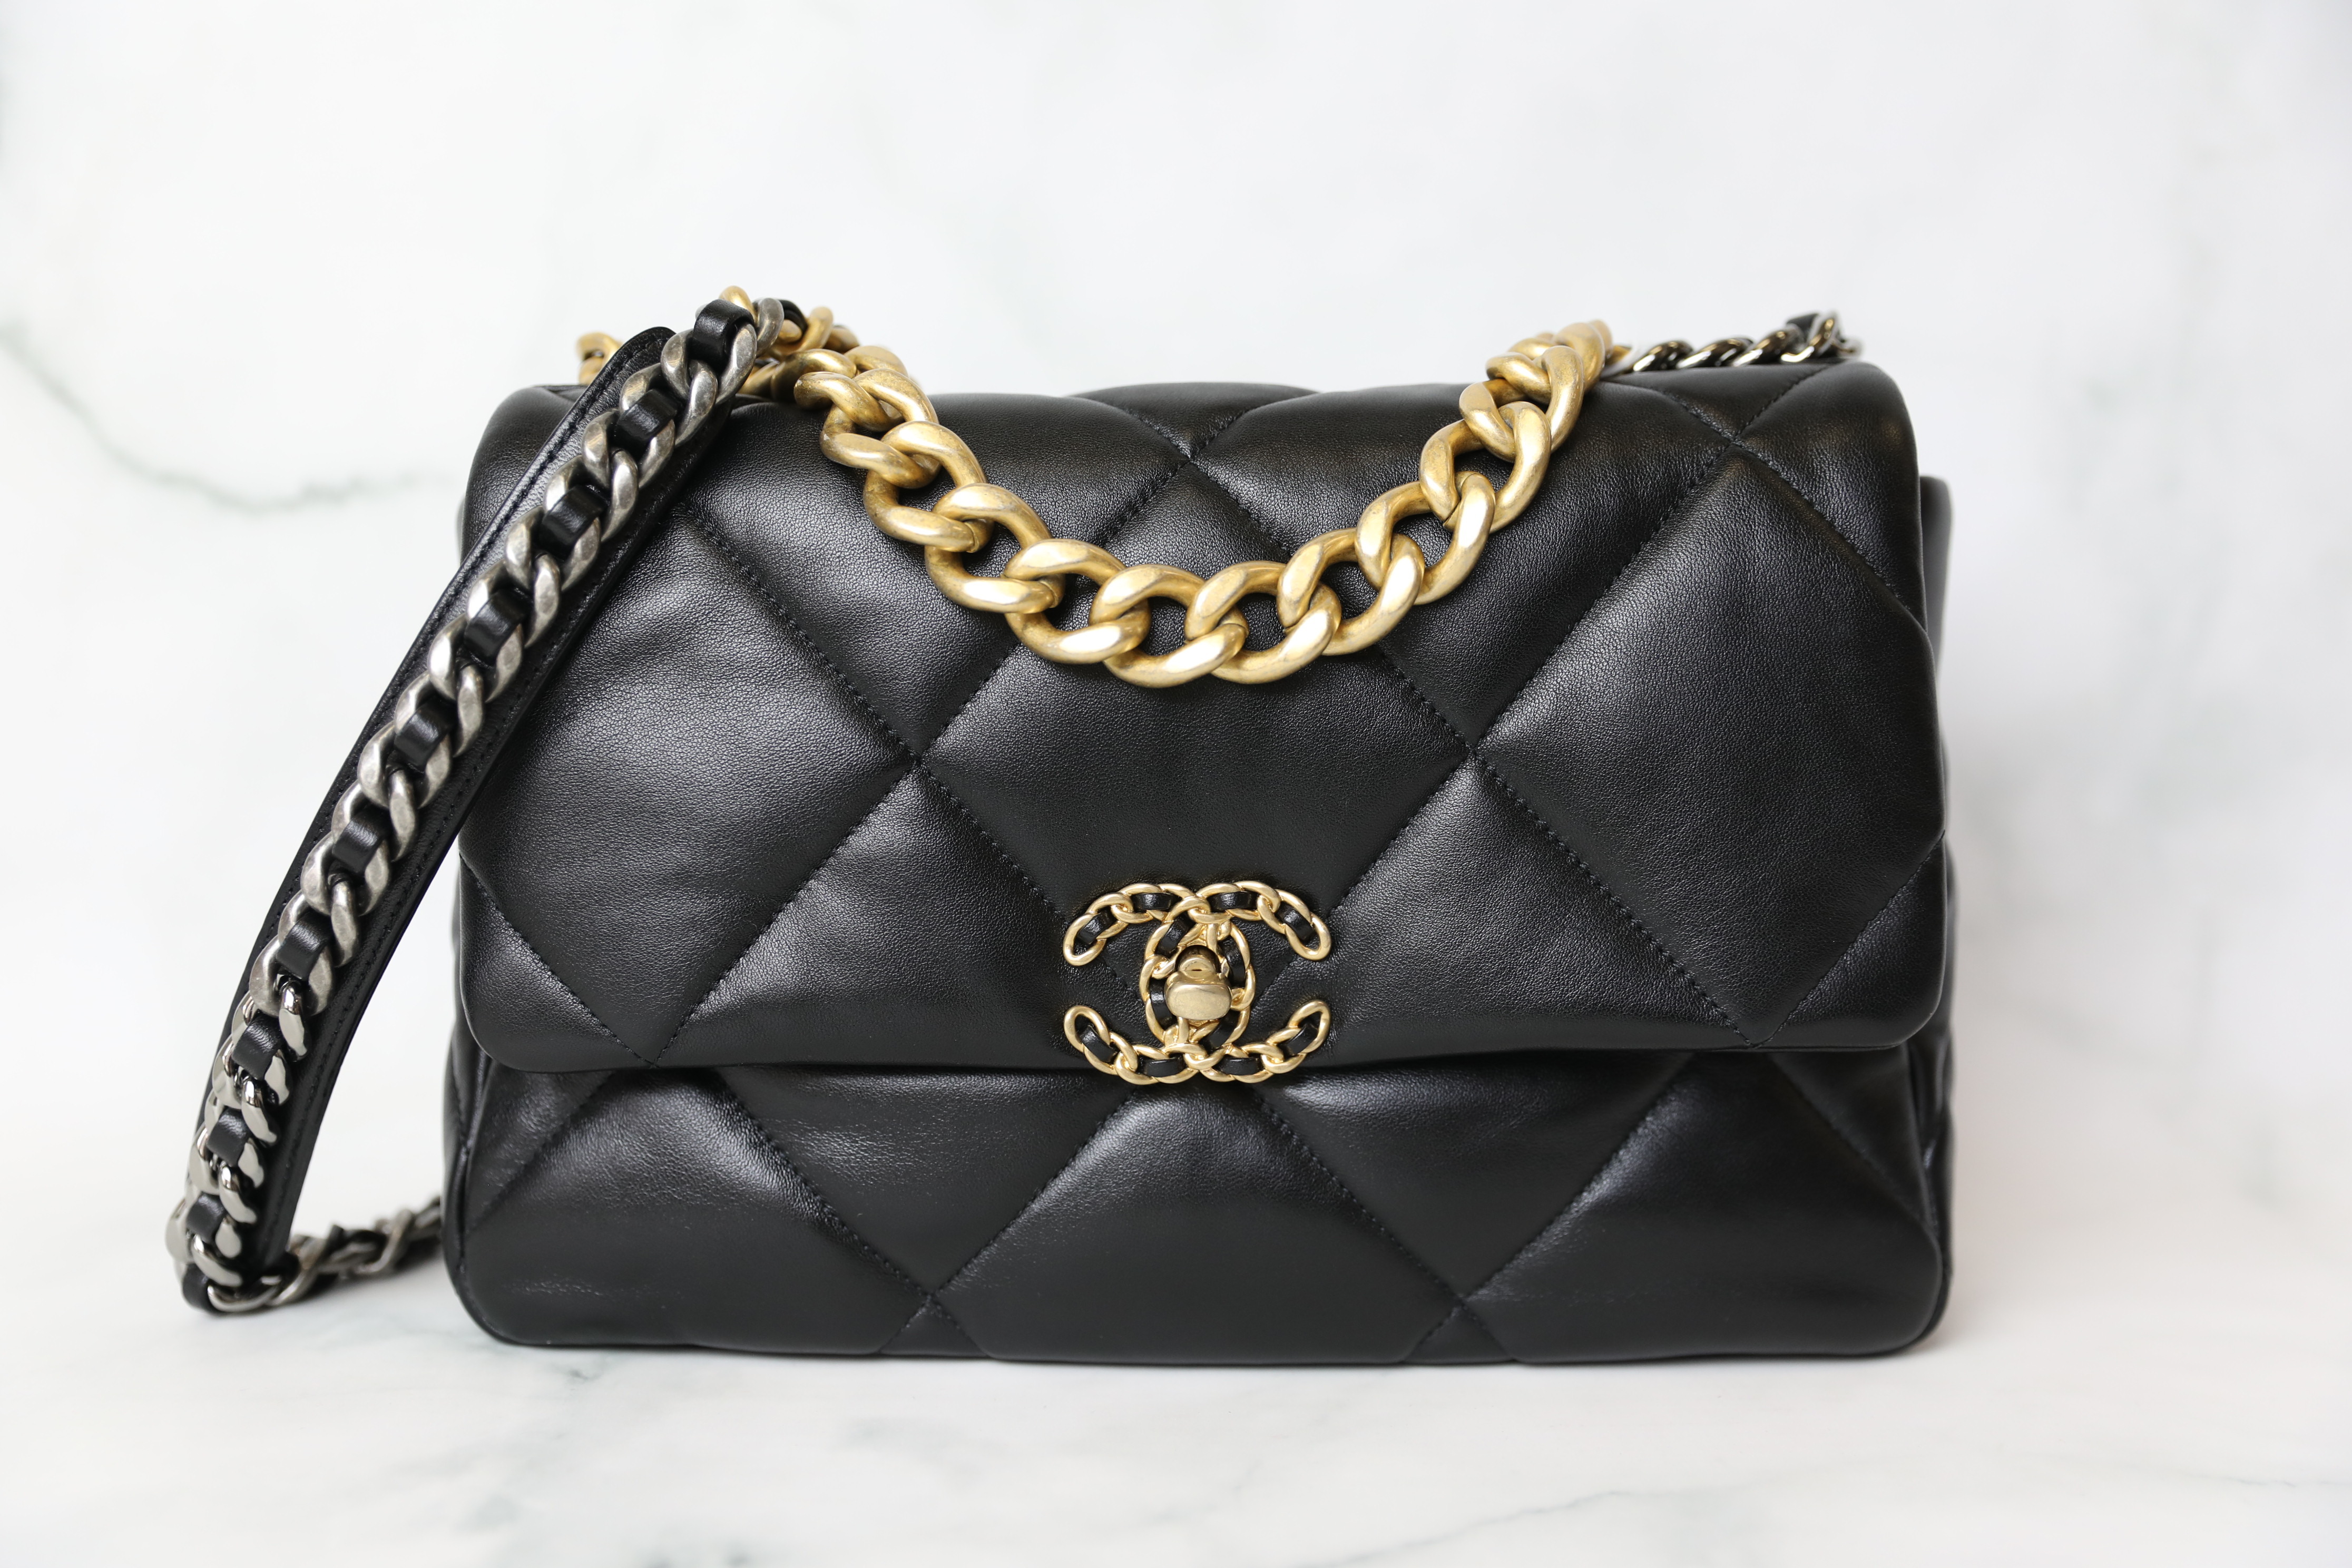 Chanel 19 Large, Black Lambskin, Preowned in Dustbag WA001